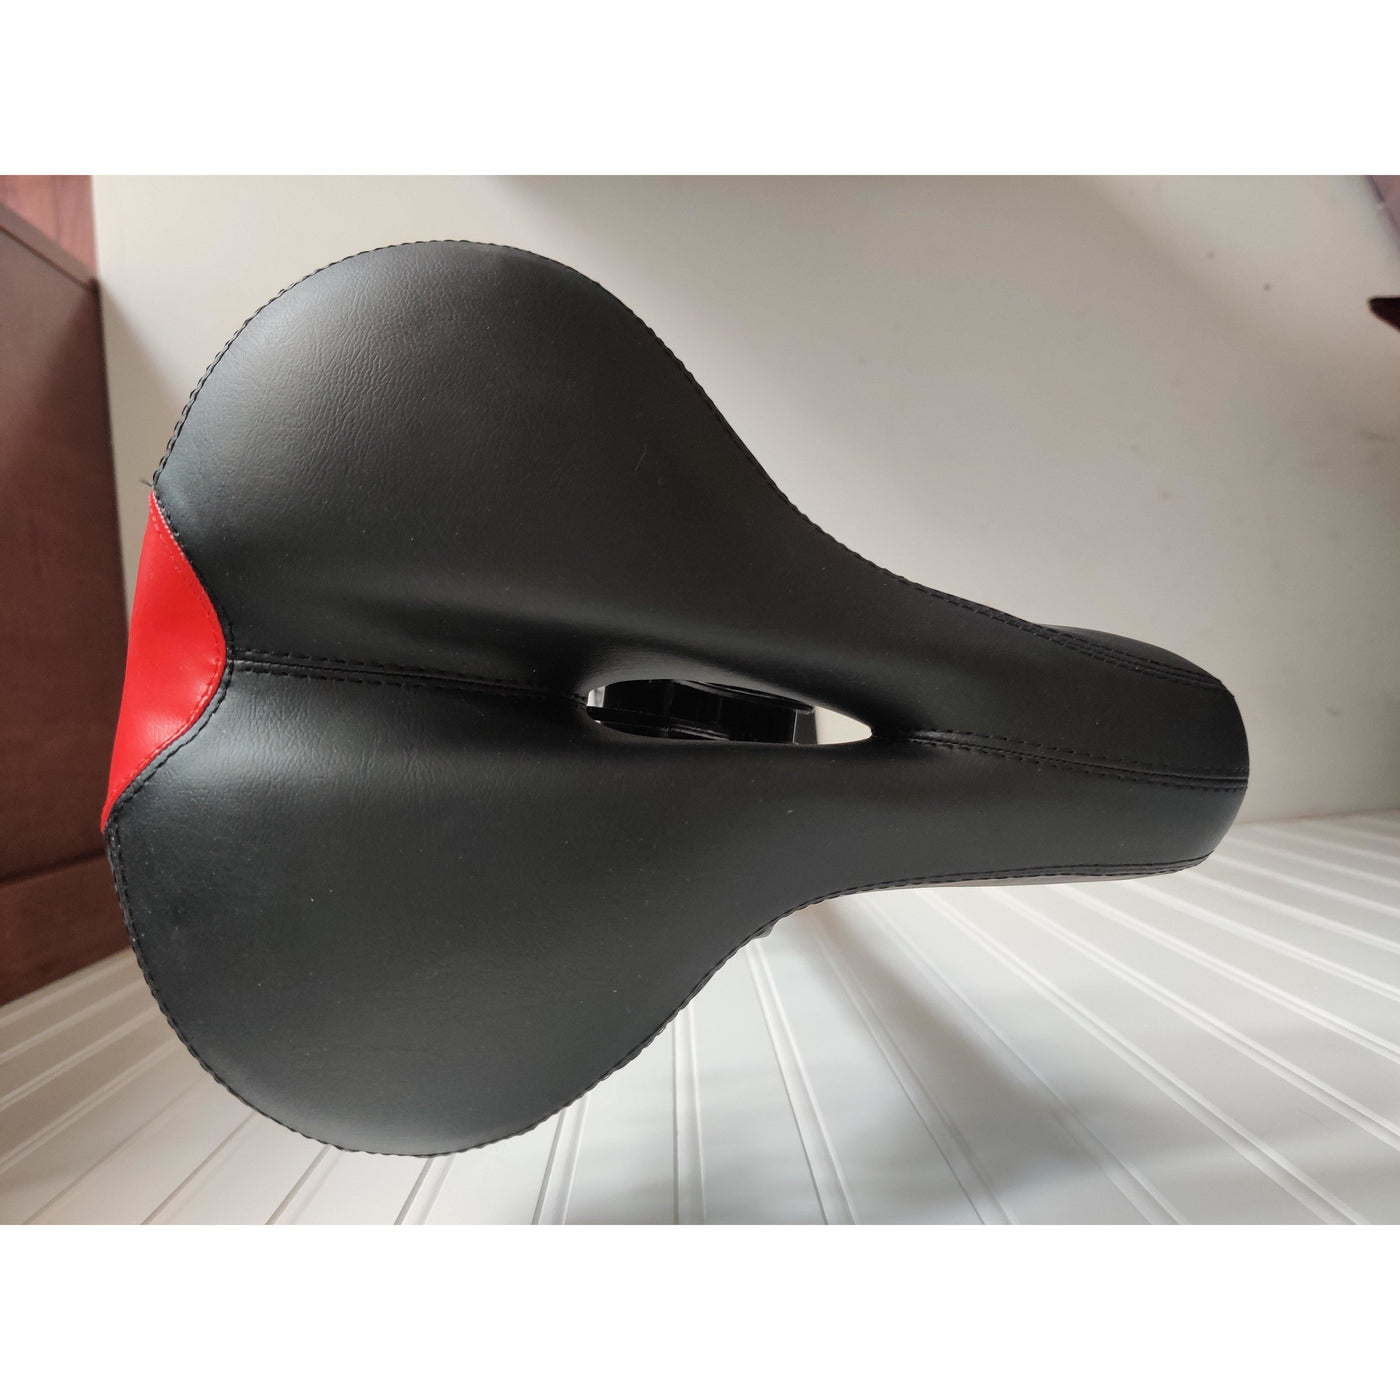 CoolFly Scooter Seat- Cushioned Seat with Seat Post( CoolFly D10 2600w) - Best Electric City Rides